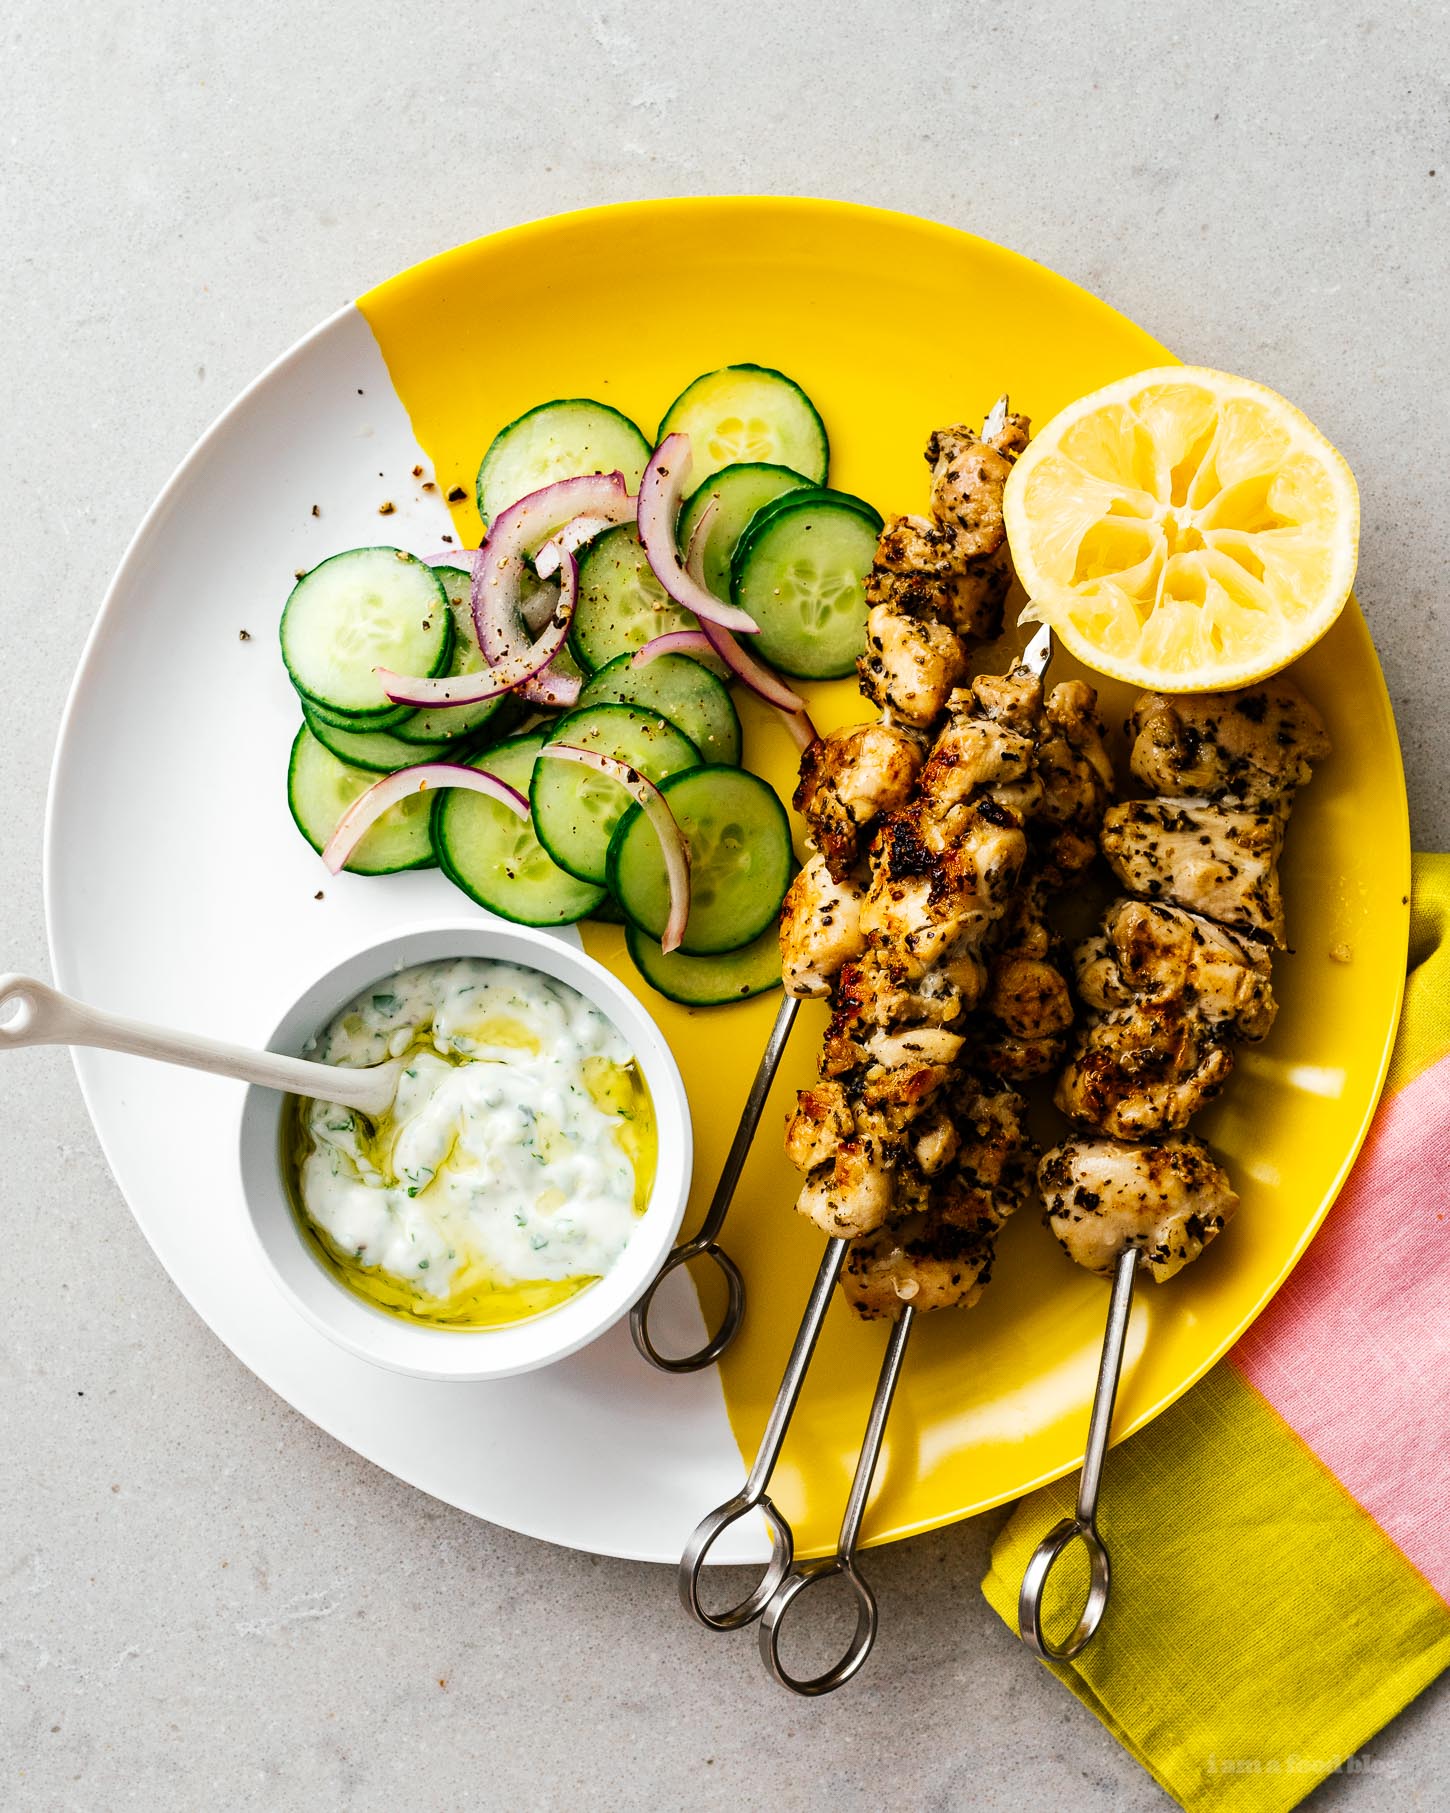 If you love chicken and are looking for a tasty recipe that’s easy to cook in the oven or on the grill, this low carb keto friendly chicken souvlaki is for you! #lowcarb #keto #ketofriendly #ketorecipe #chicken #chickenrecipe #recipes #dinner